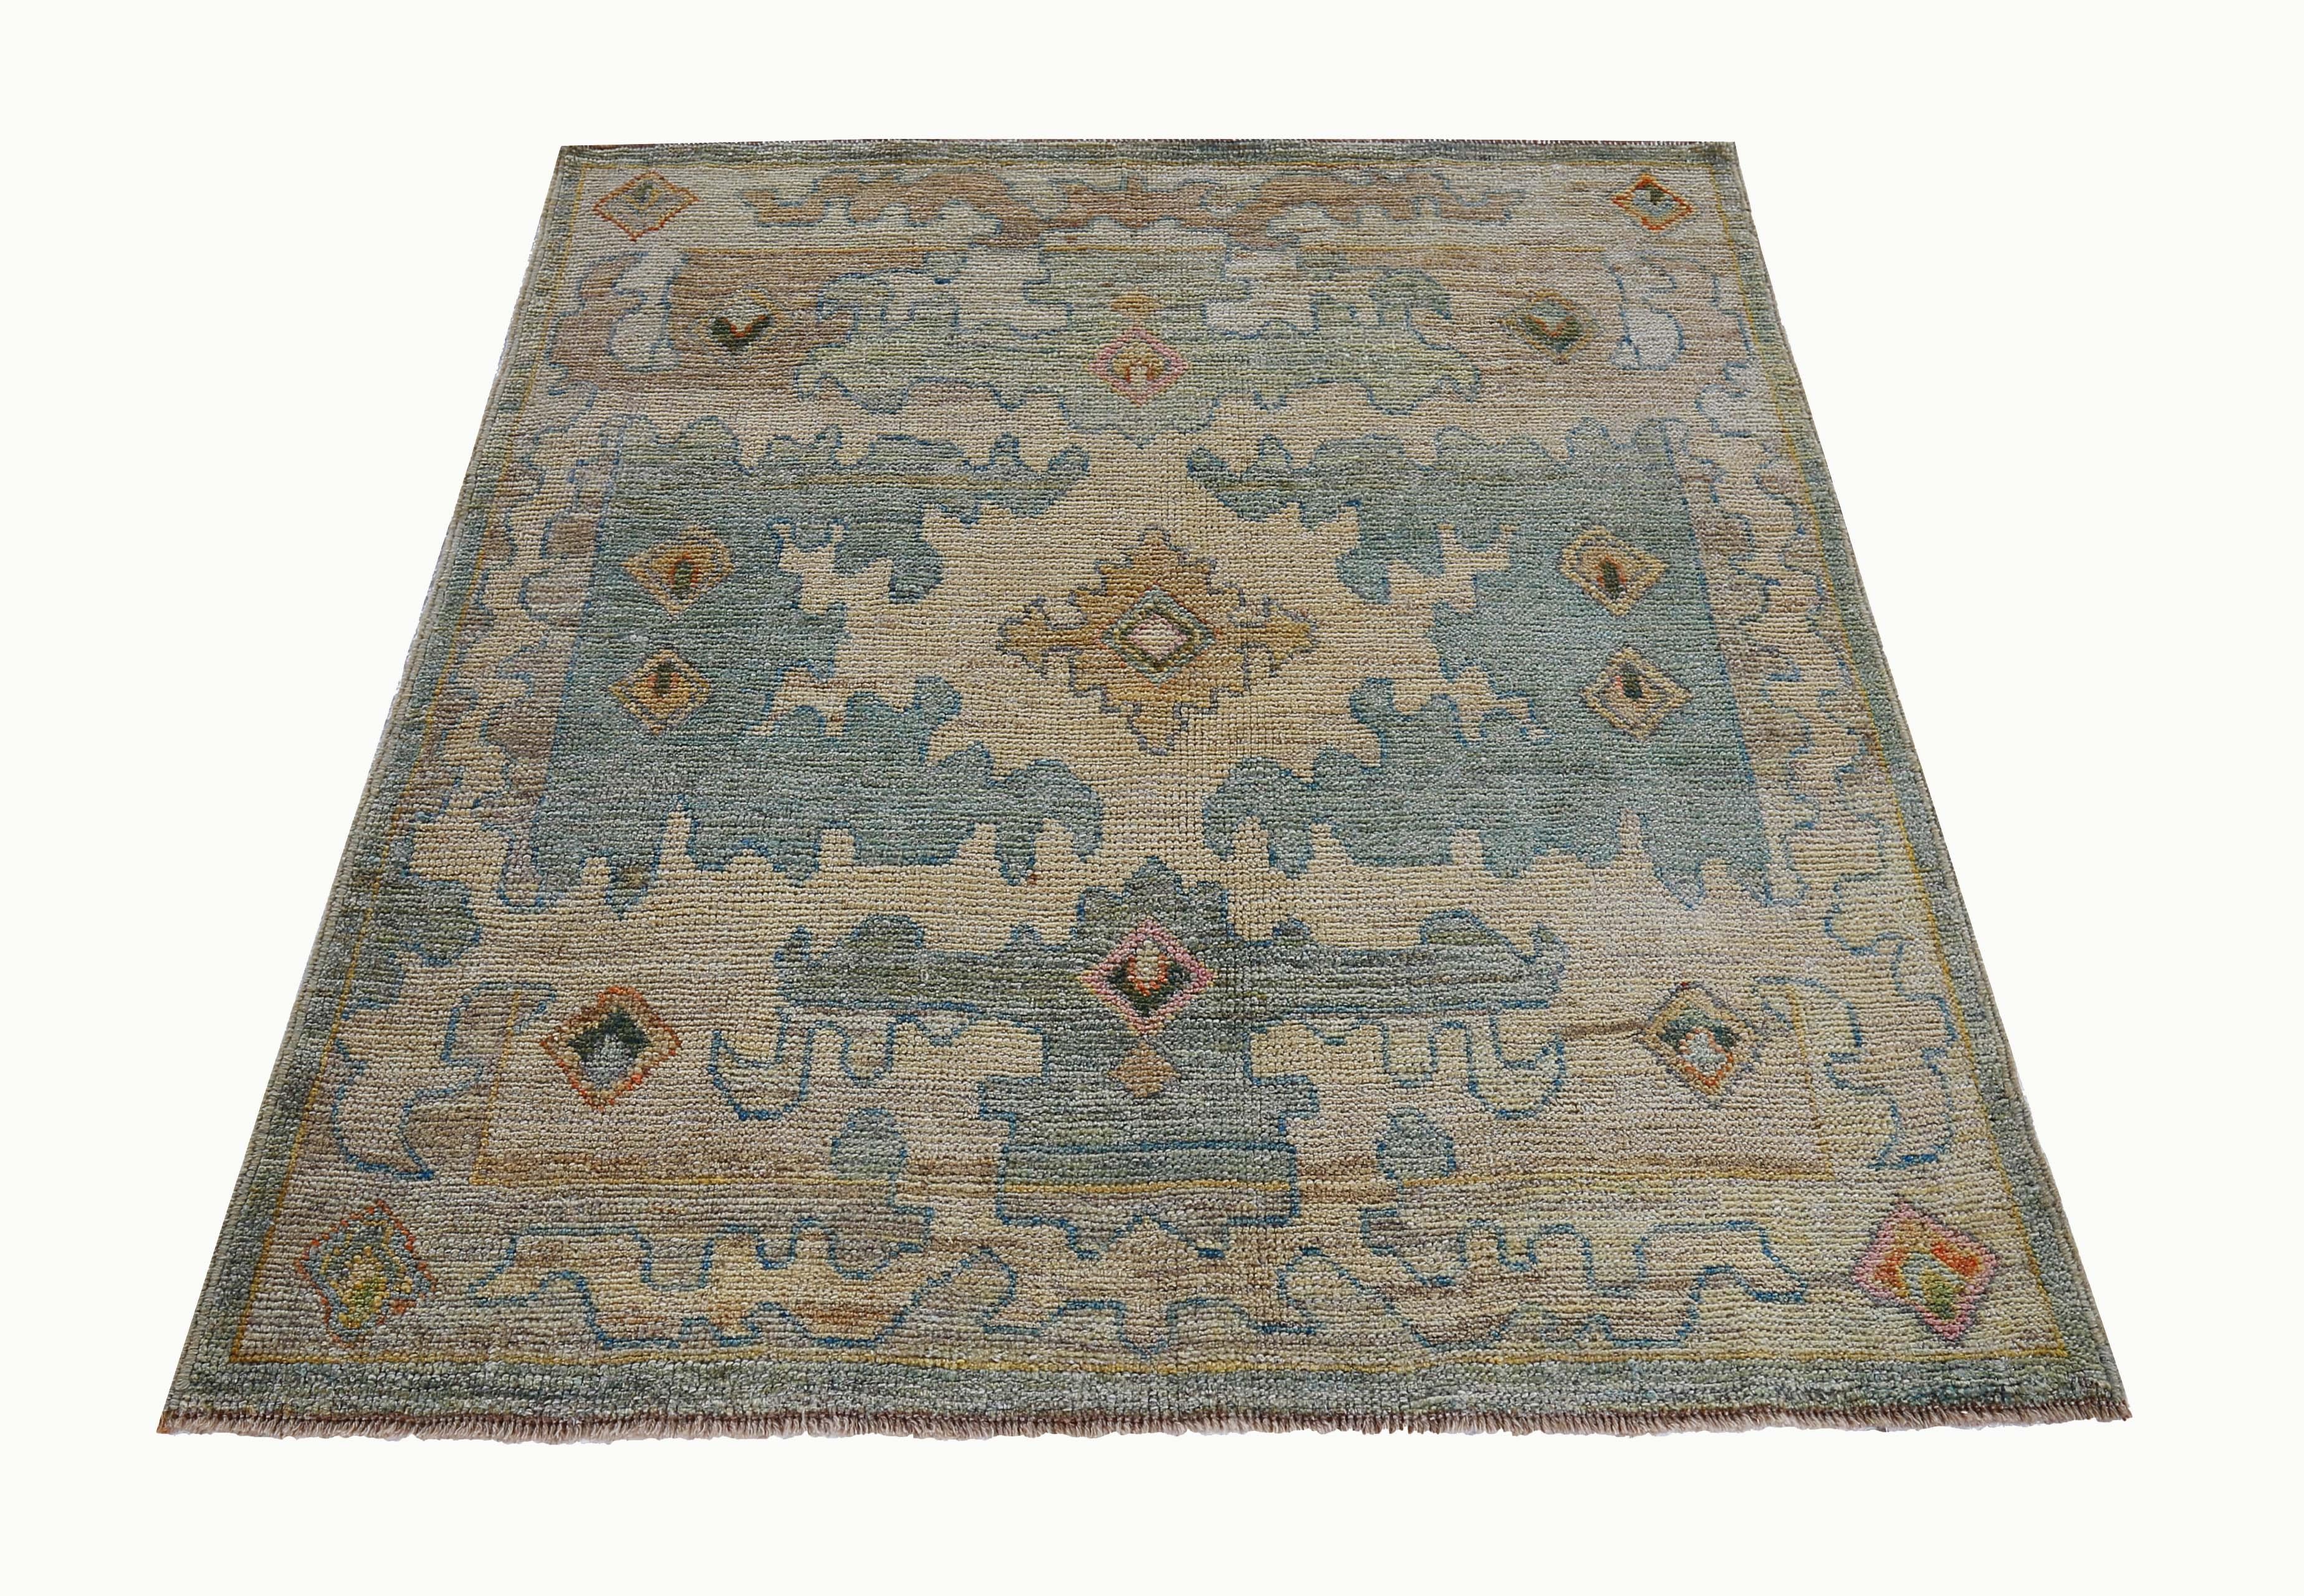 New Turkish rug made of handwoven sheep’s wool of the finest quality. It’s colored with organic vegetable dyes that are certified safe for humans and pets alike. It features floral details in blue and green over a beige field. Flower patterns are